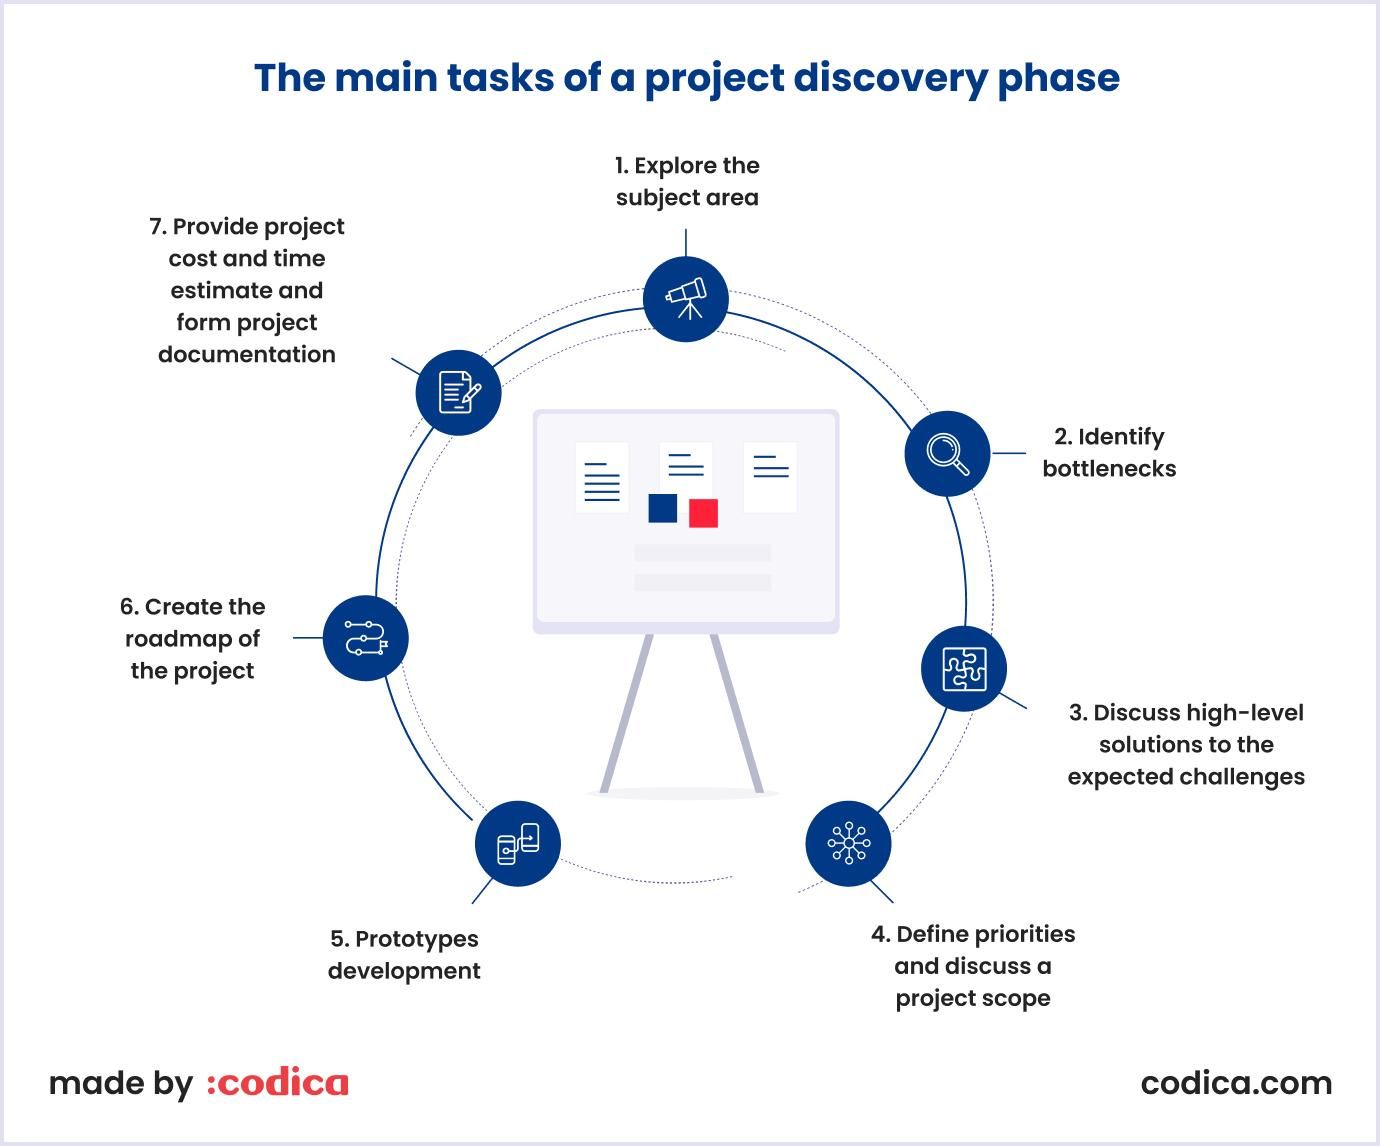 Tasks of the project discovery phase